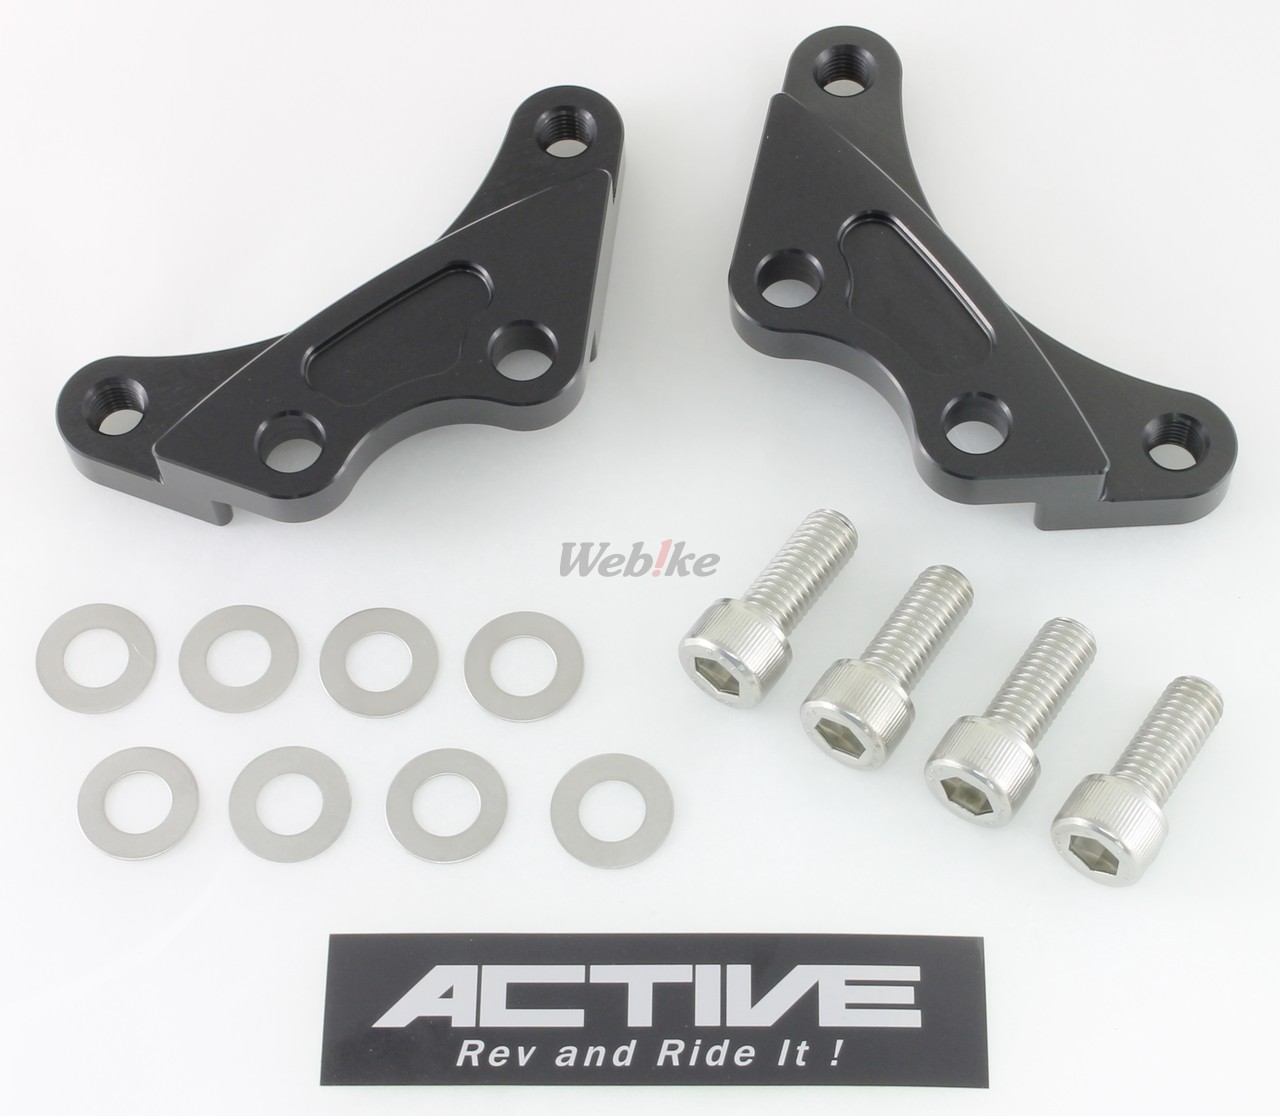 ACTIVE アクティブ キャリパーサポート 40mm SPEED スタンダードローター径 brembo GALE